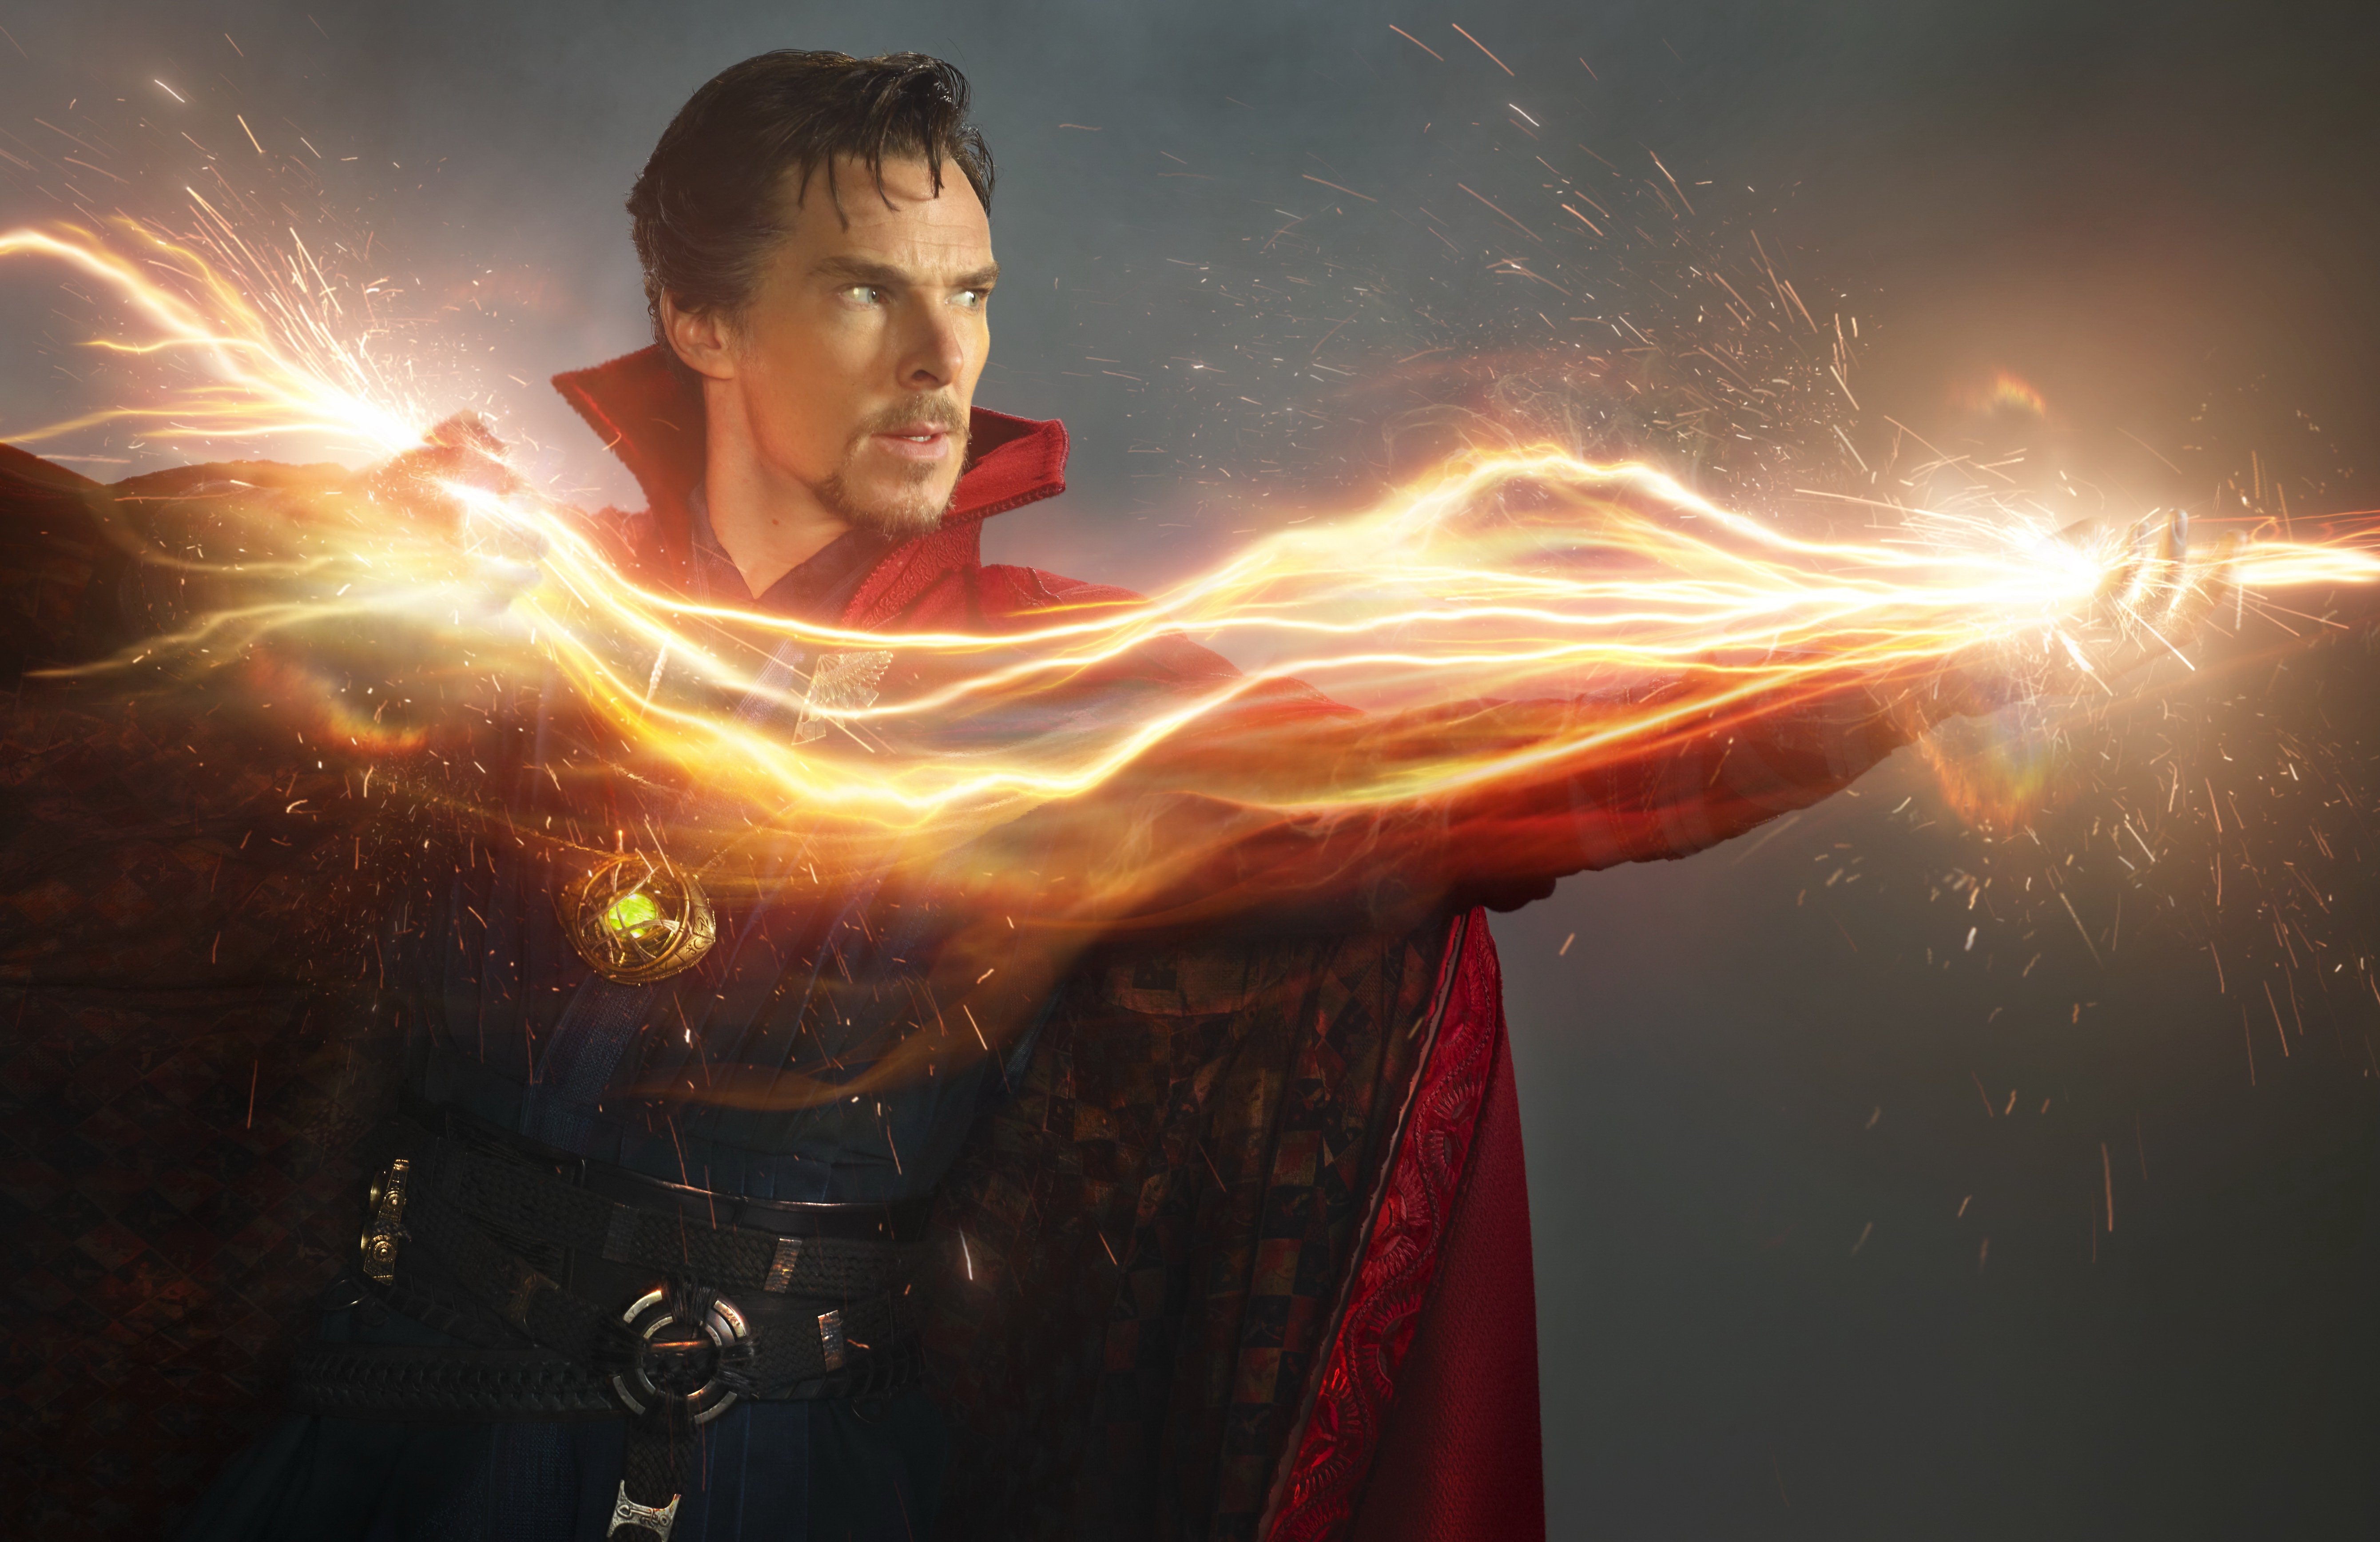 Benedict Cumberbatch as Doctor Strange, in a publicity photo showing him in front of a neutral background, zapping something offscreen with a huge wave of bright orange magical energy